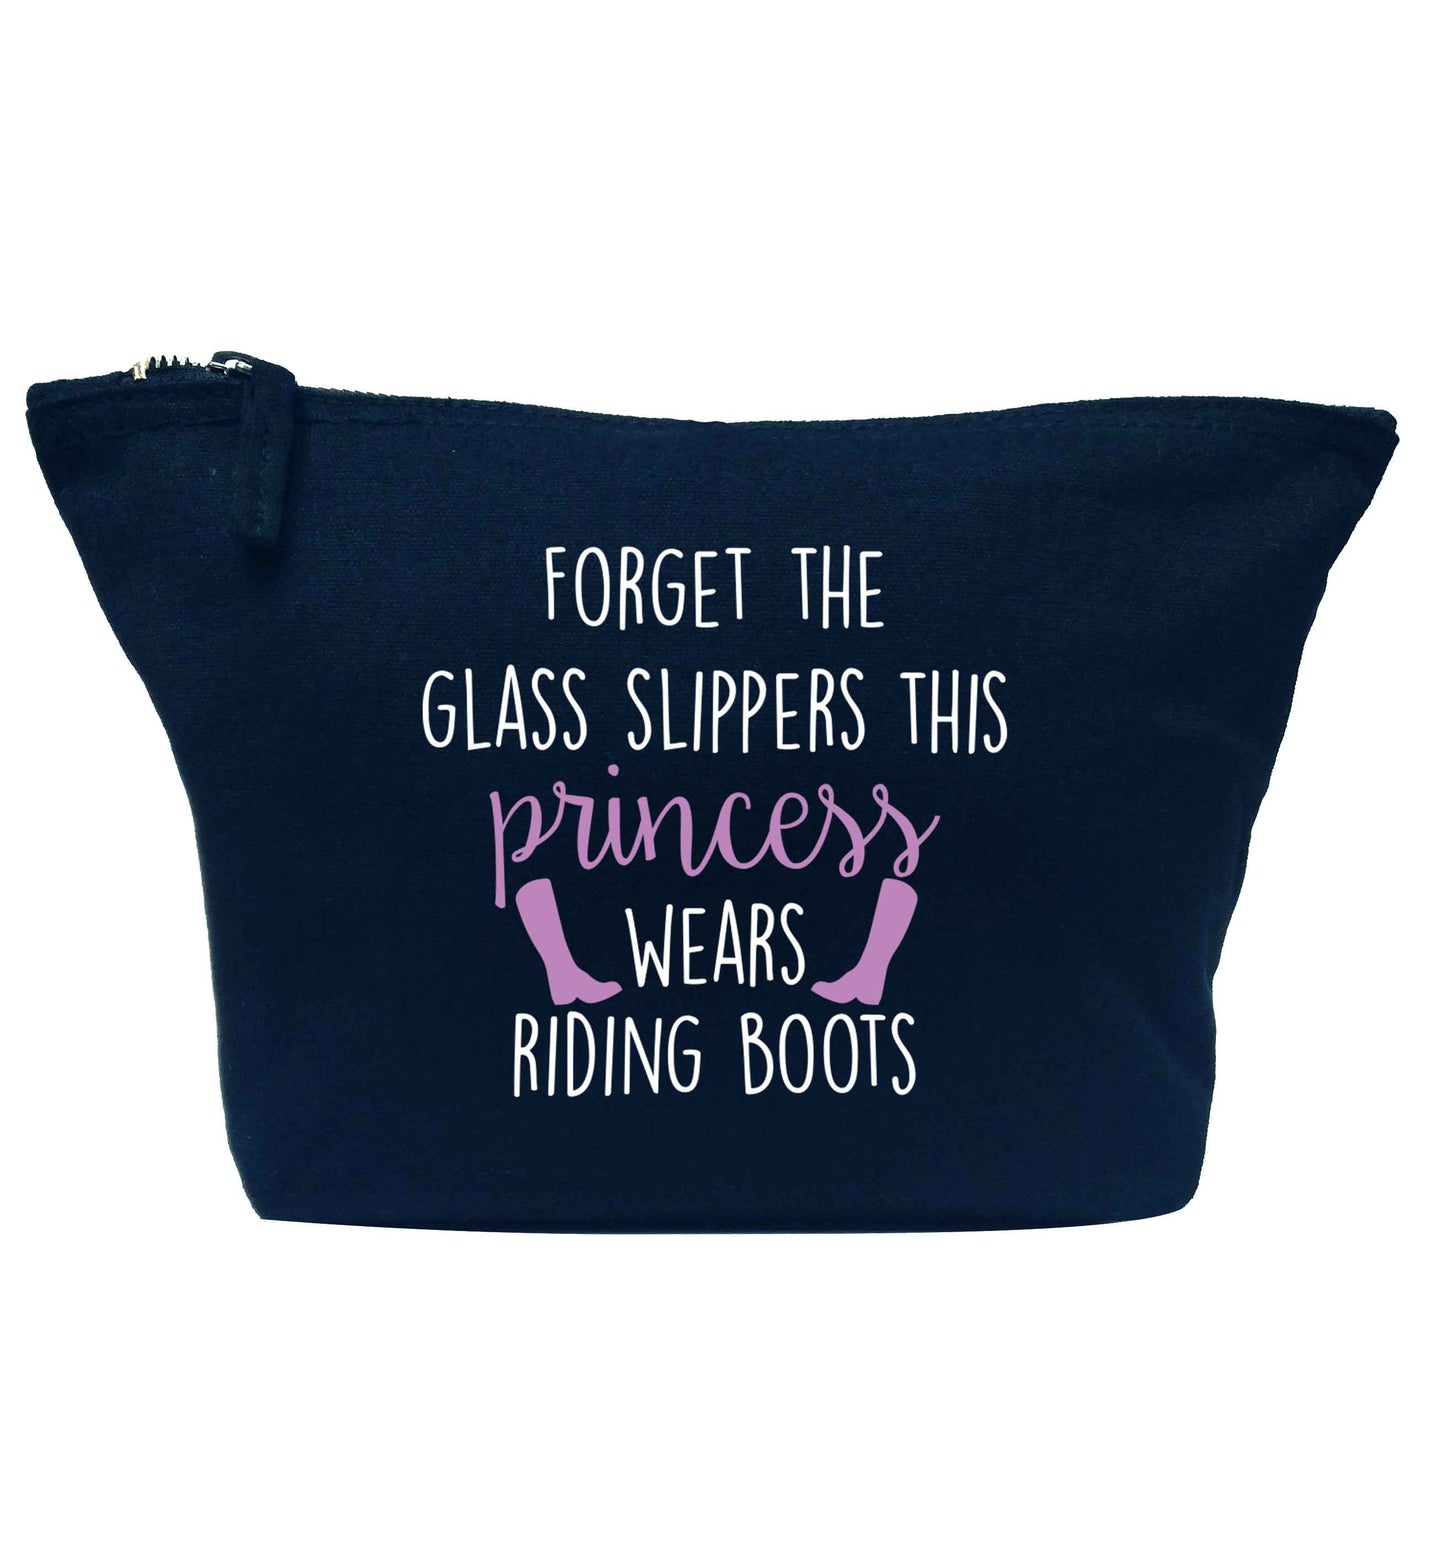 Forget the glass slippers this princess wears riding boots navy makeup bag